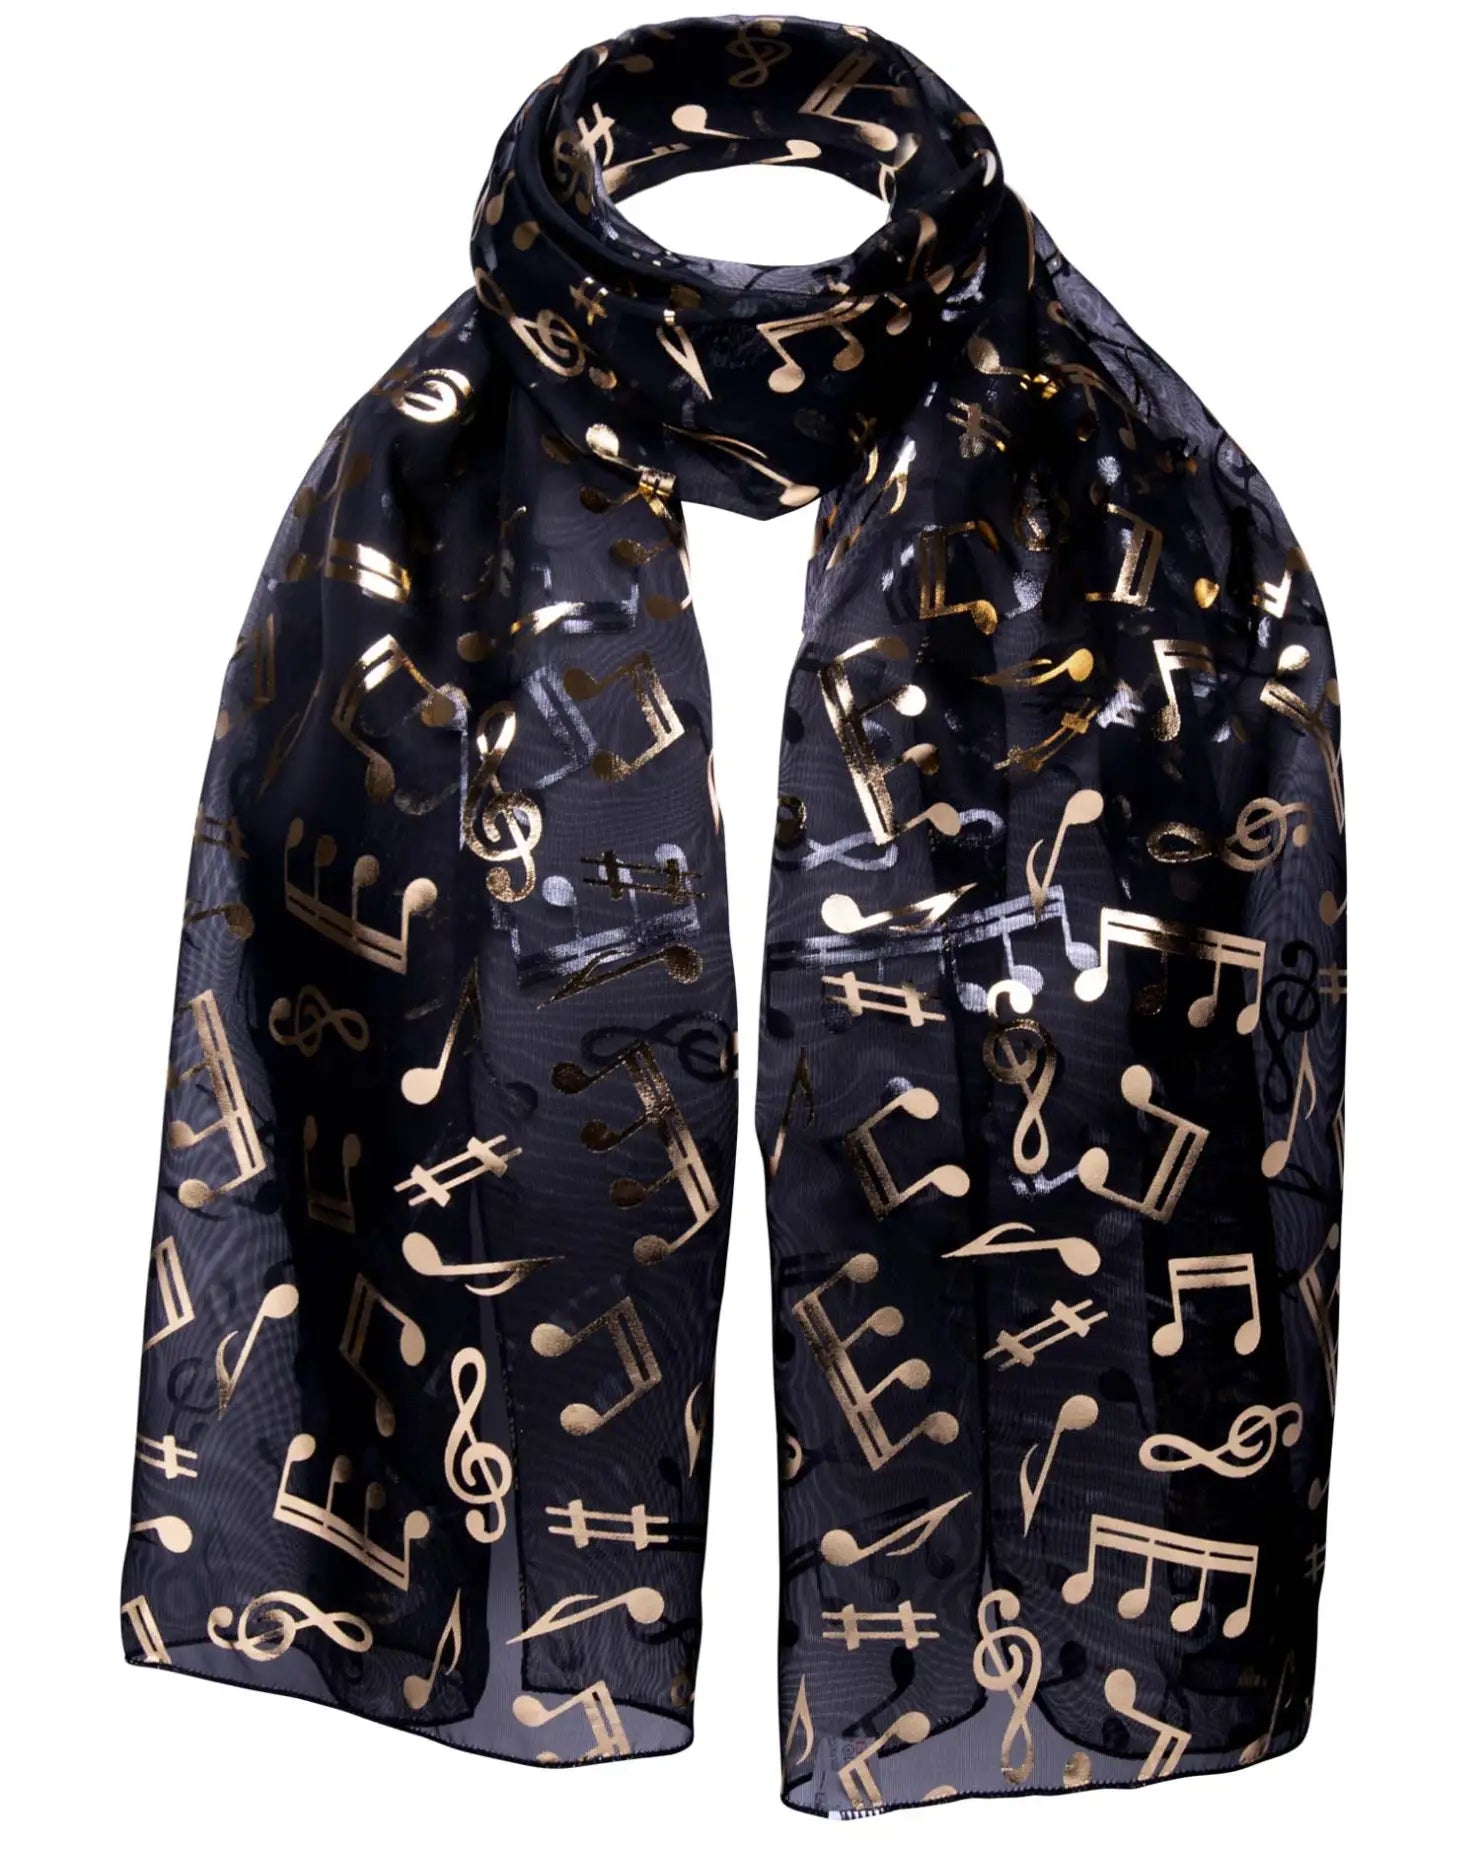 Black scarf with gold foil music notes, Gold Foil Music Note Chiffon Group Scarf.